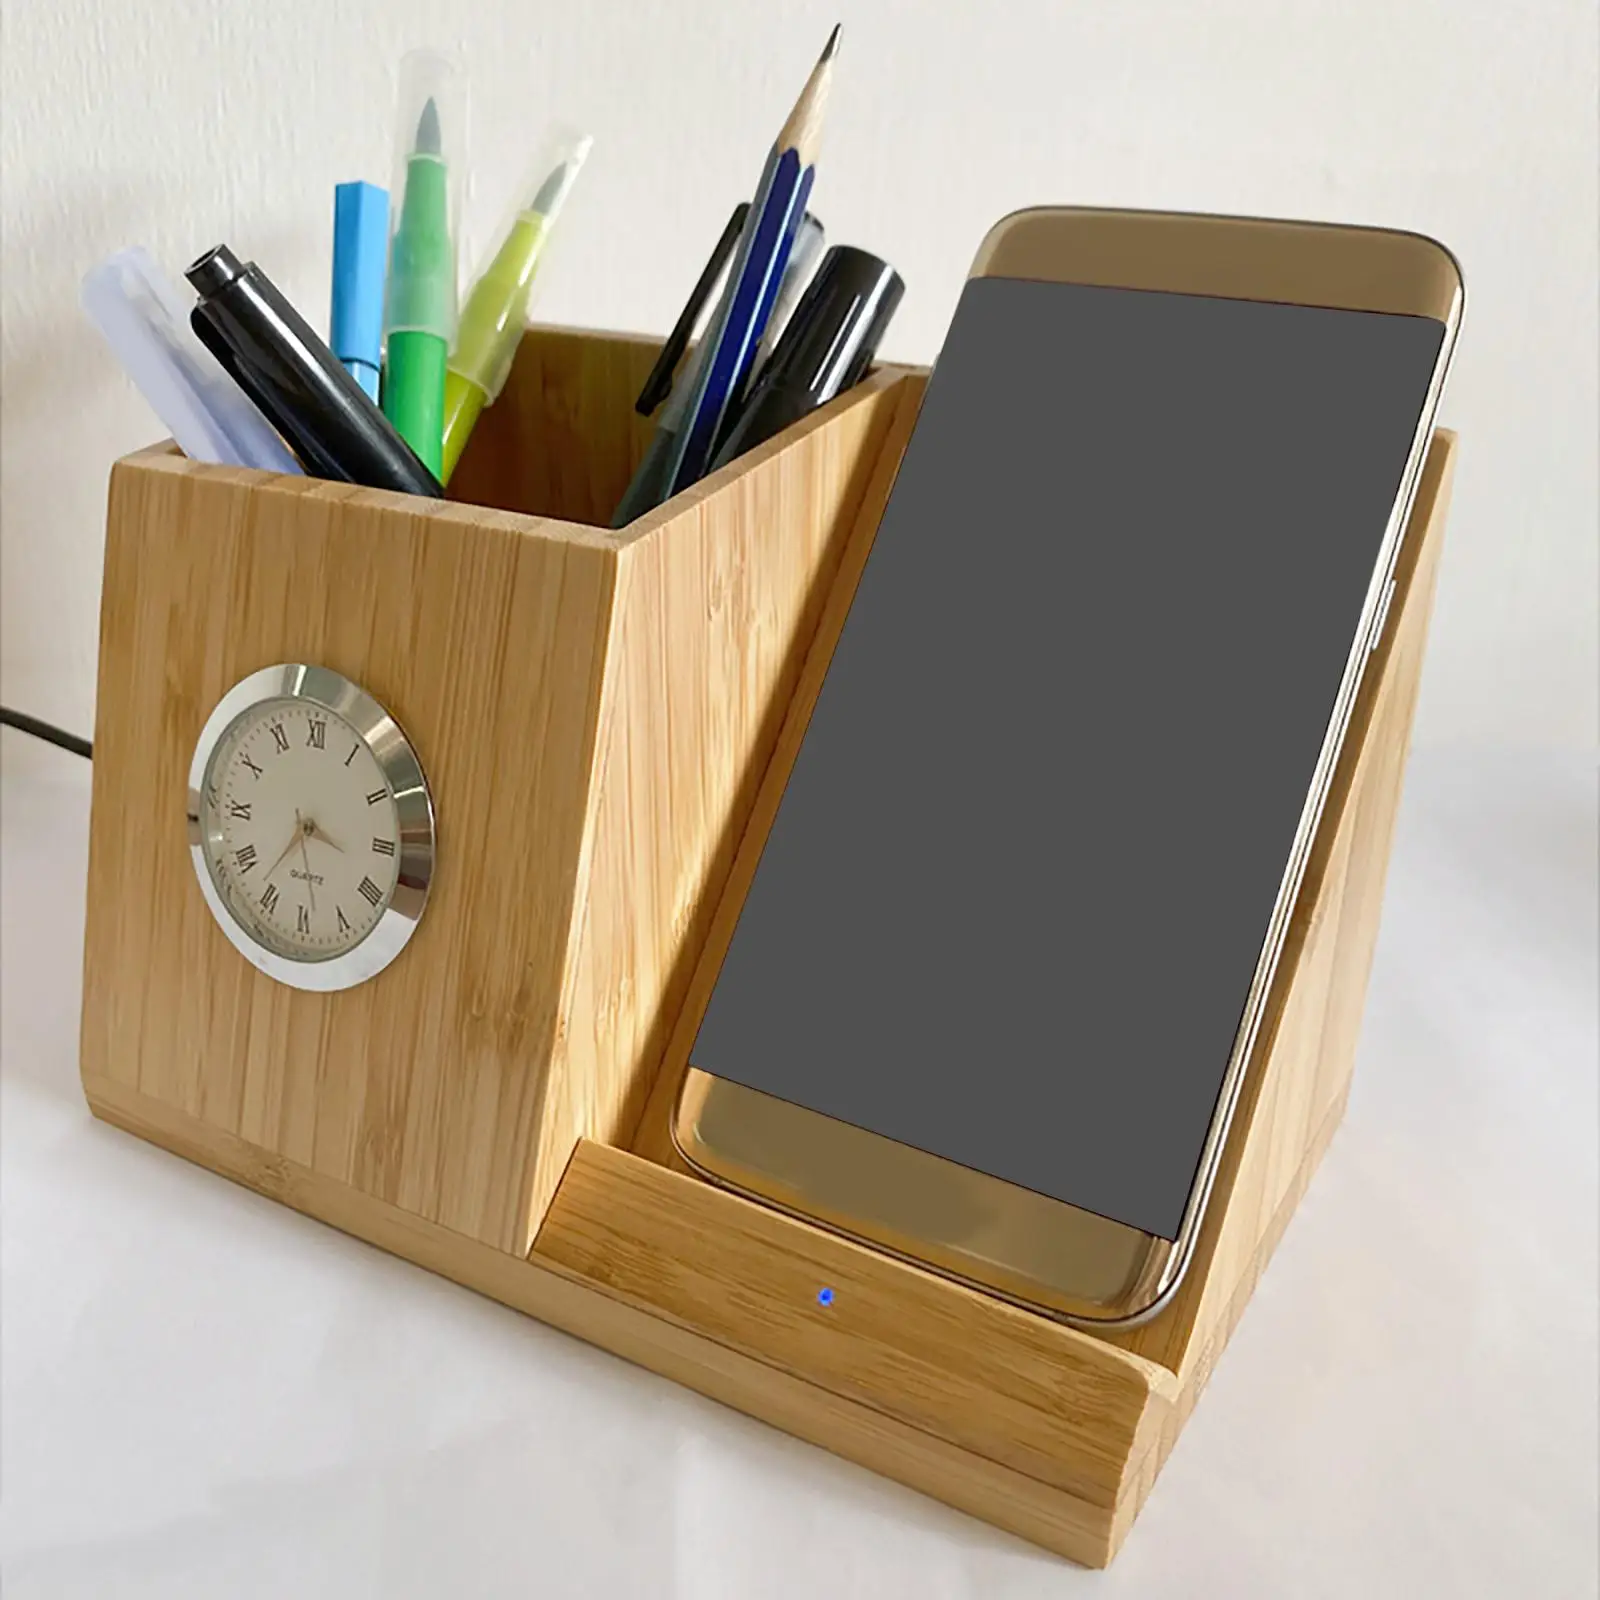 1x Wireless Charger 10W Pen Holder W/ Clock Bamboo Wood 4in1 Multifunction Durable Phone Charging Station for Pencil Storage